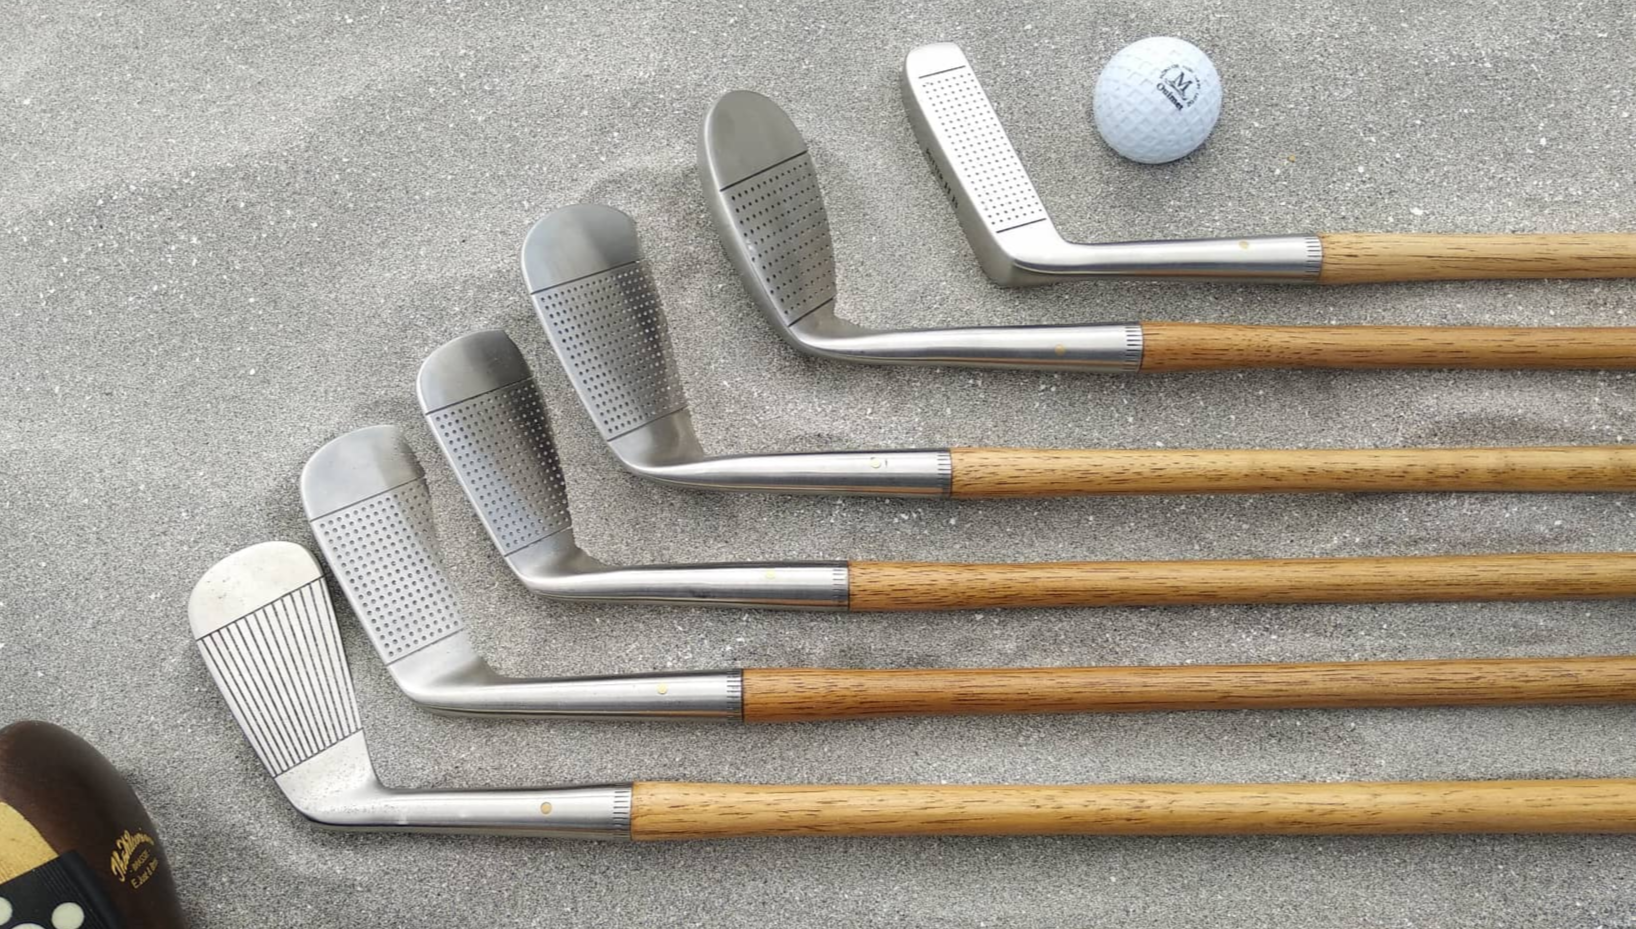 Hickory golf clubs laid together on sand with replica ball.